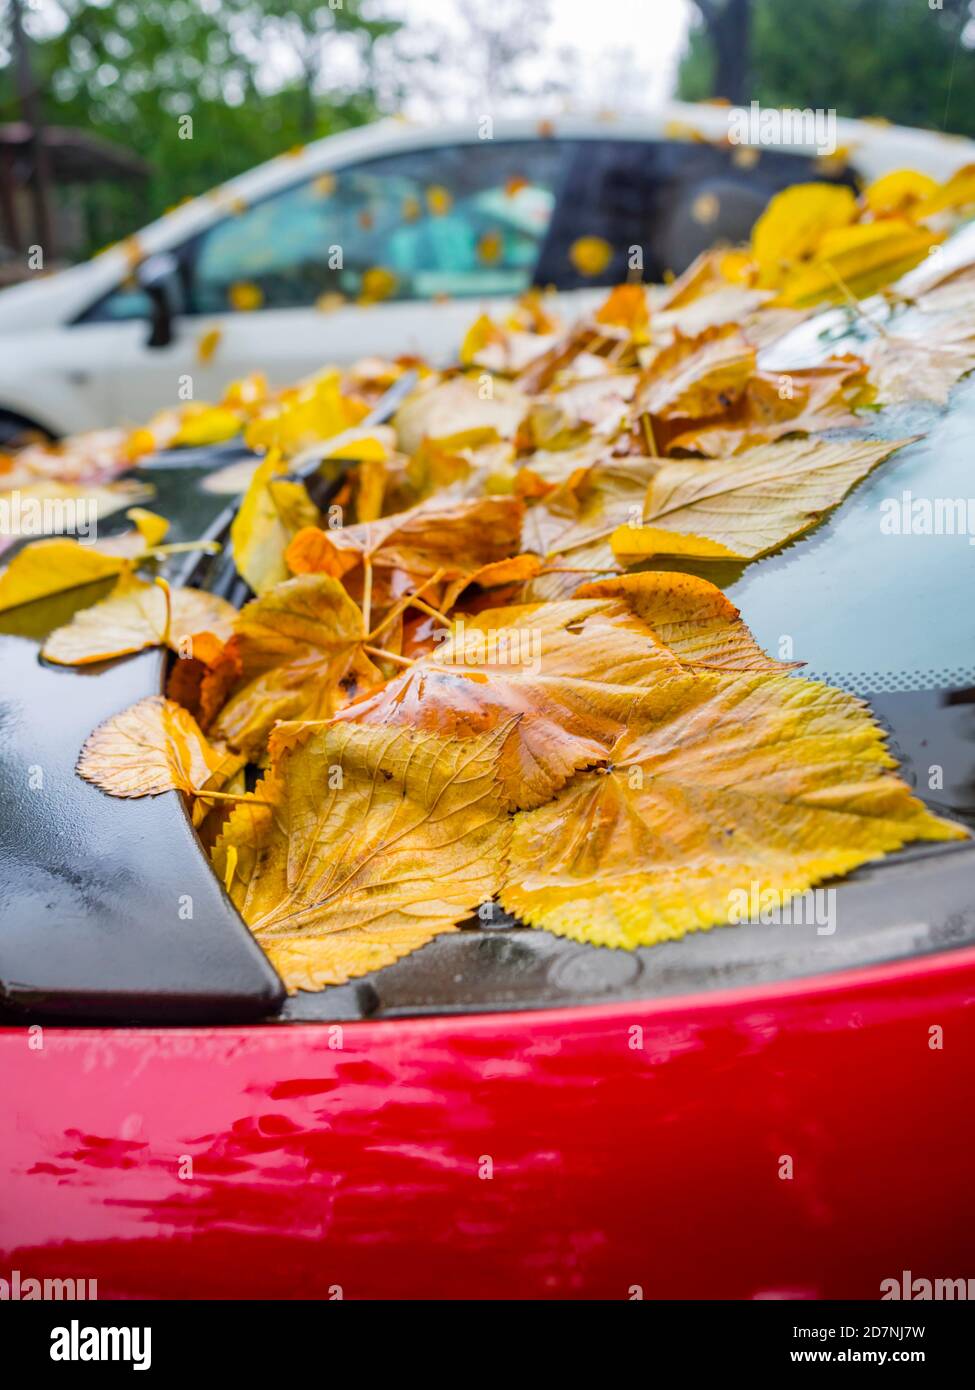 Fallen leaves closeup close-up view on atop Red parked car vehicle Autumnal Autumn Fall season Stock Photo